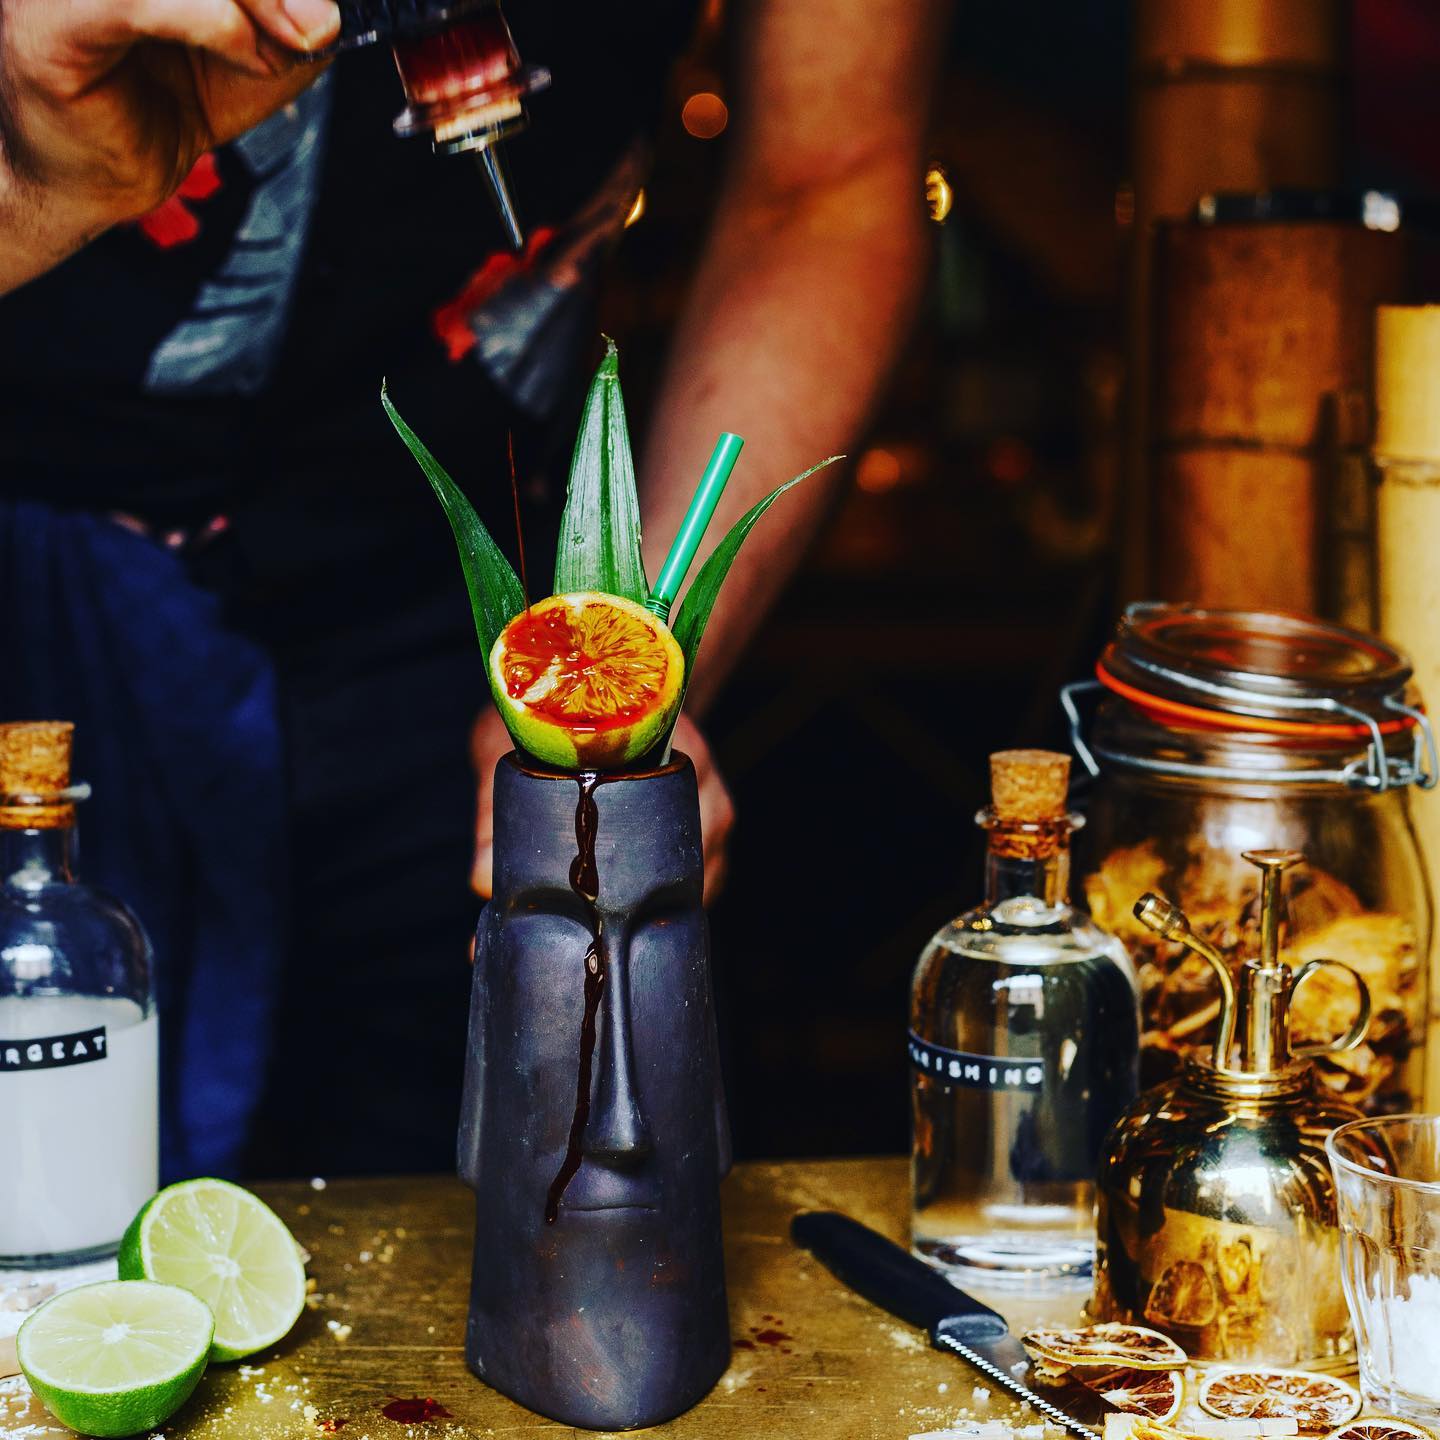 A brand-new &#8216;Polynesian paradise&#8217; tiki bar has opened in the Northern Quarter, The Manc